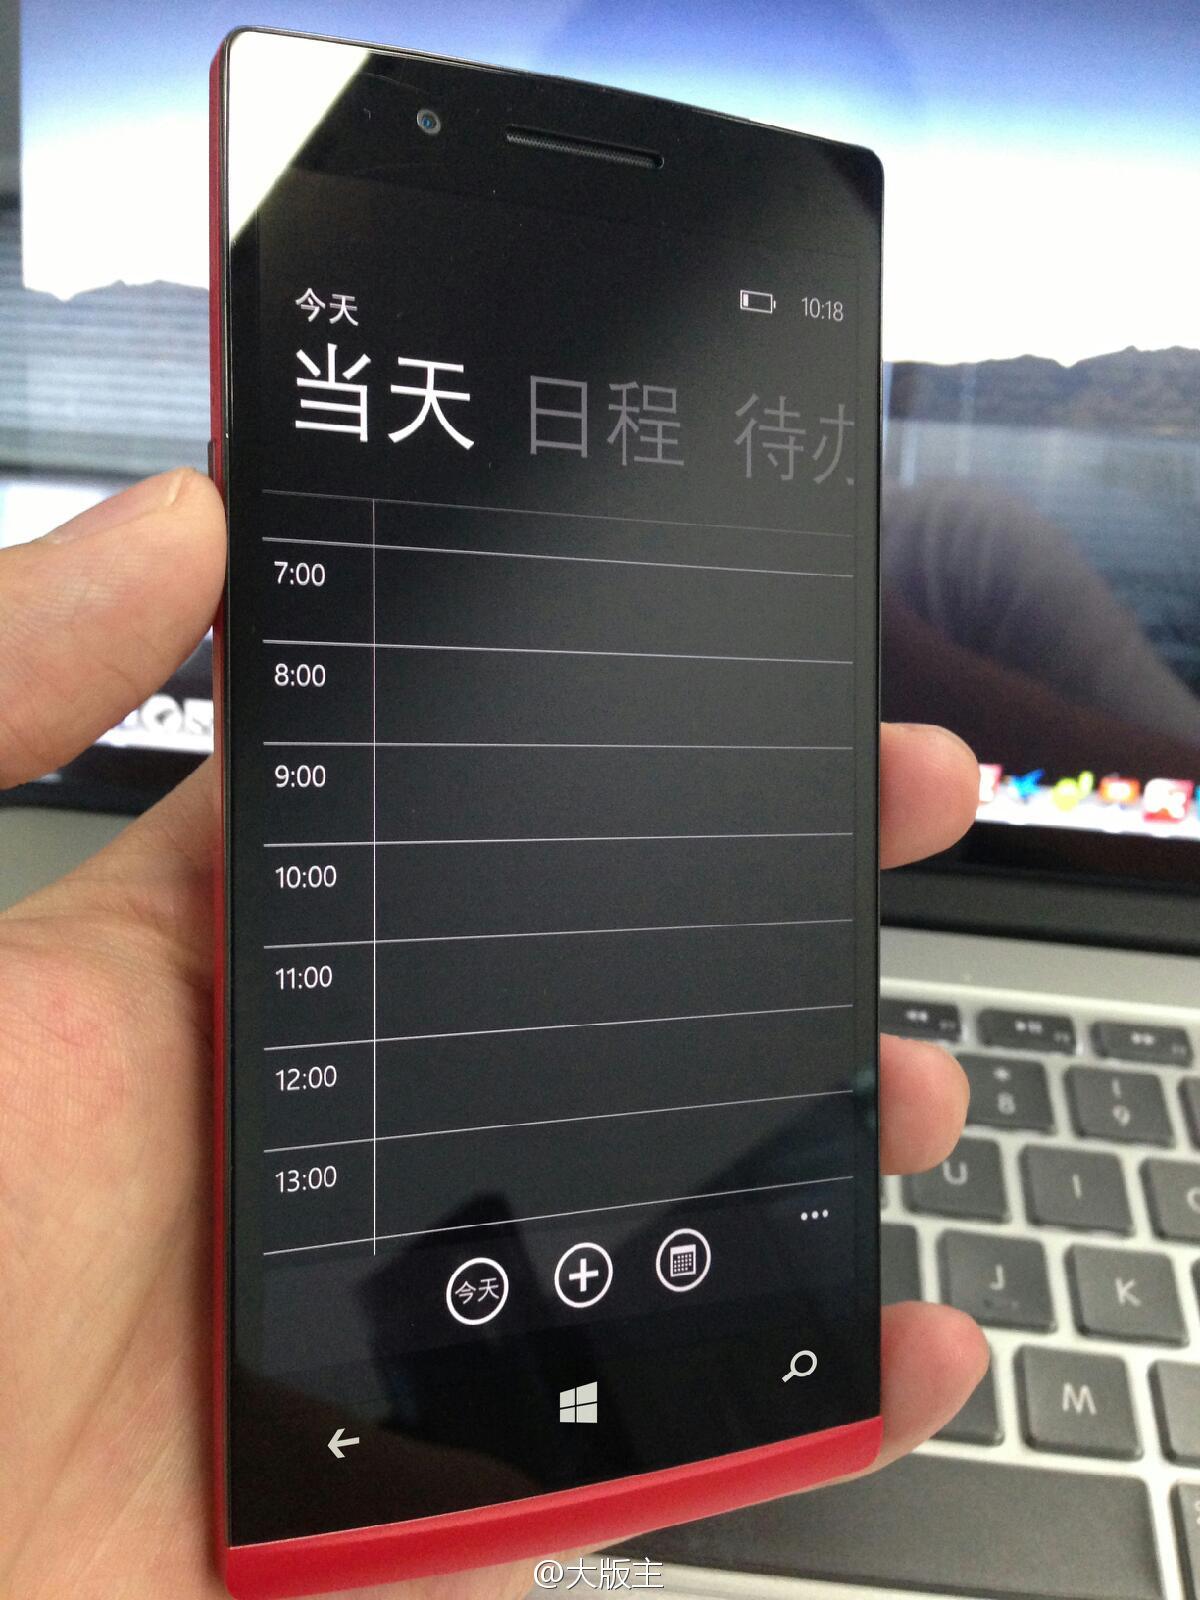 Is Chinese OEM OPPO considering a Windows Phone 8 device